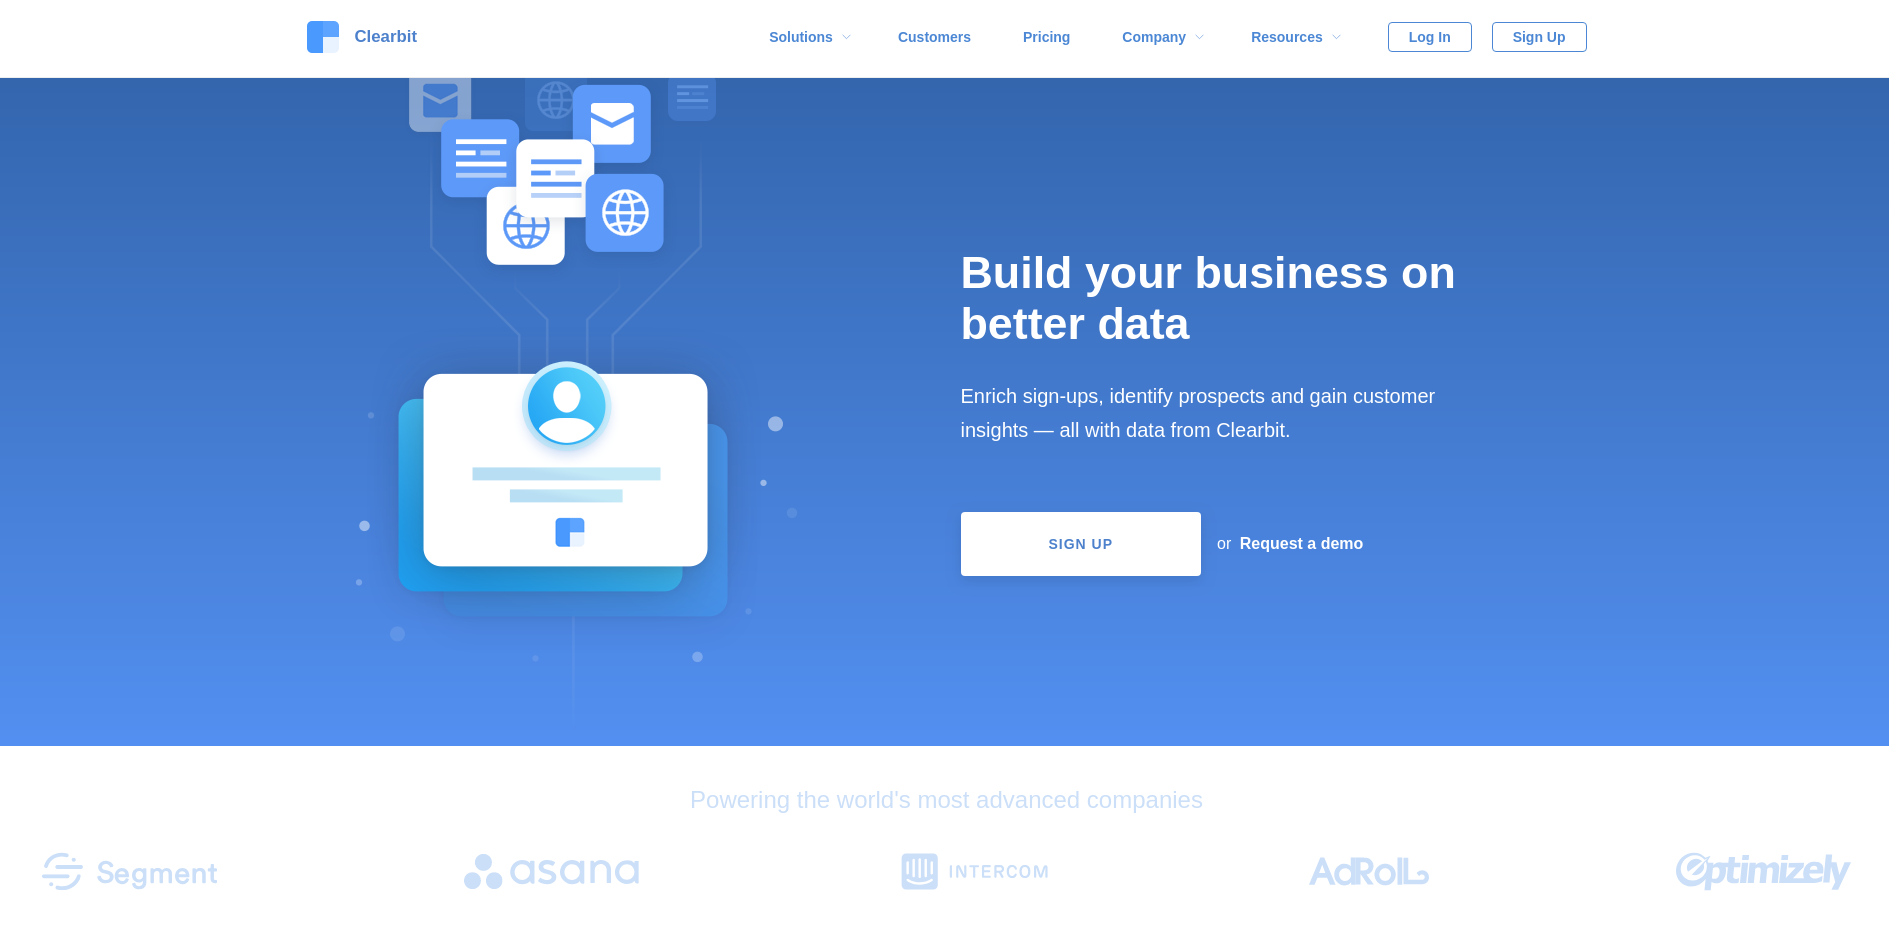 clearbit product marketing tool landing page